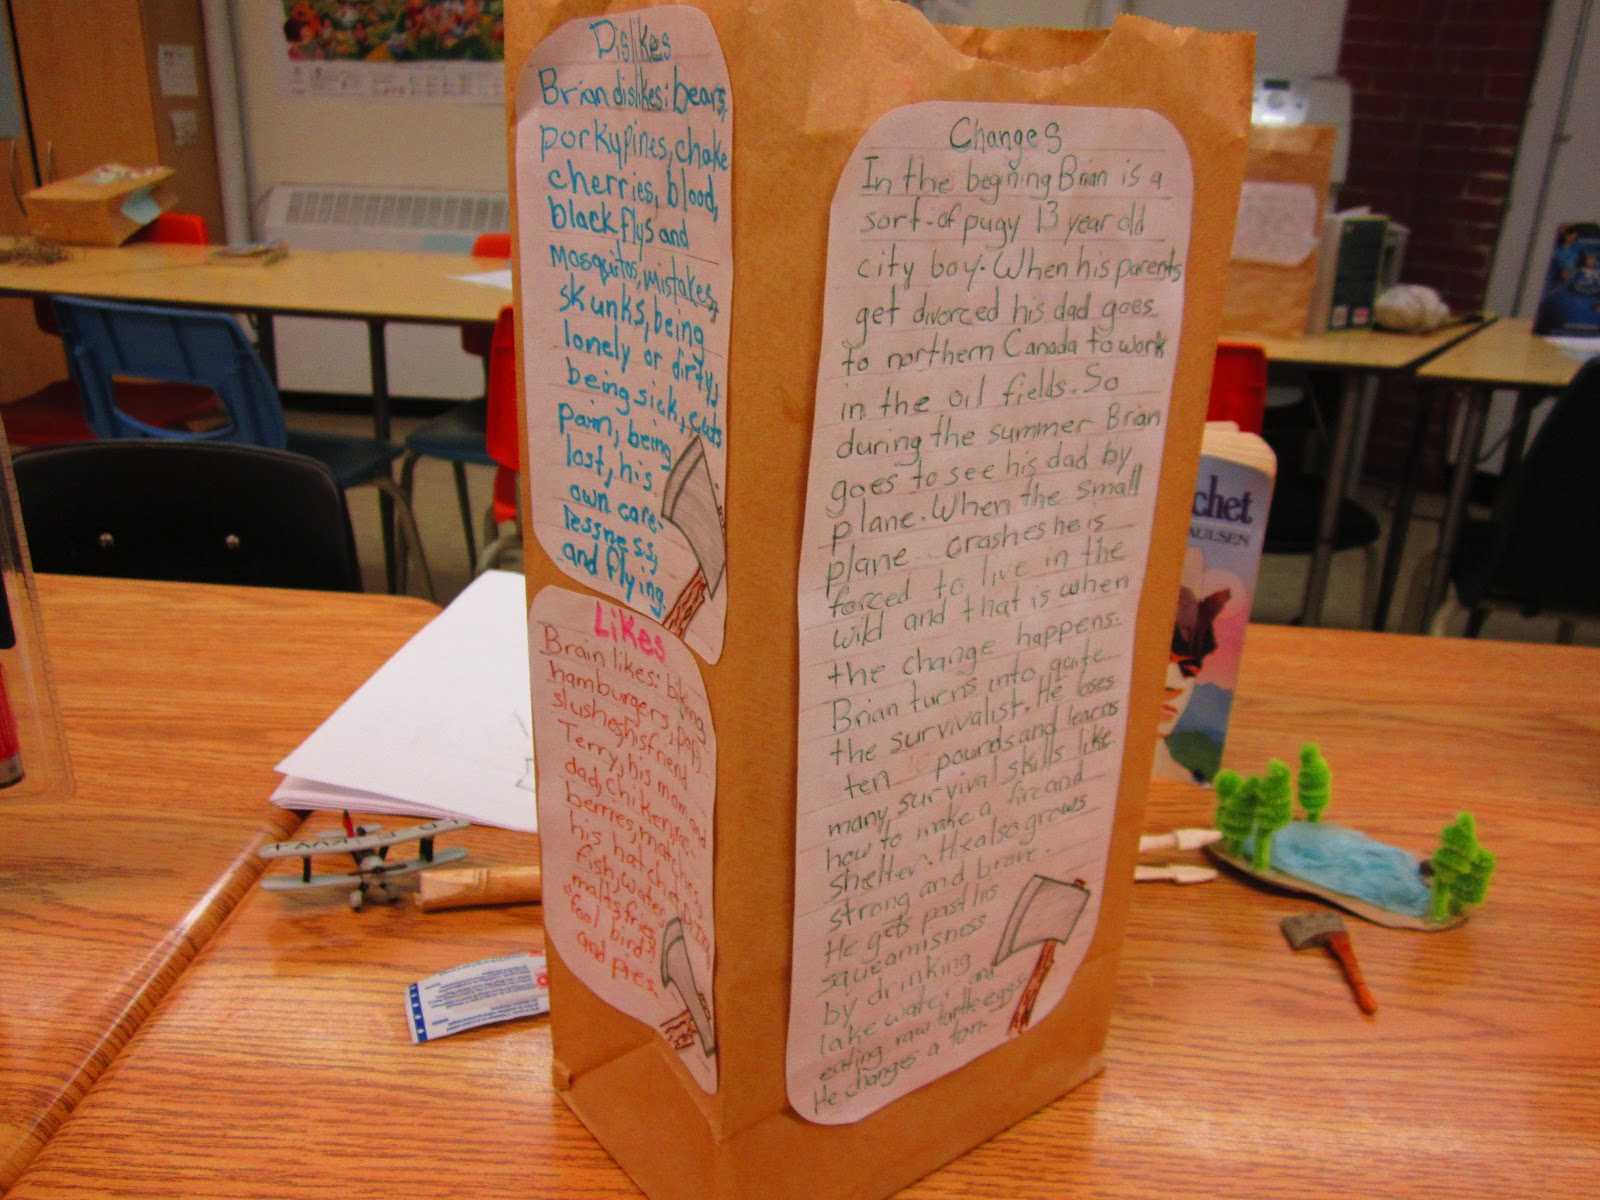 Paper Bag Characterization | Runde's Room Pertaining To Paper Bag Book Report Template